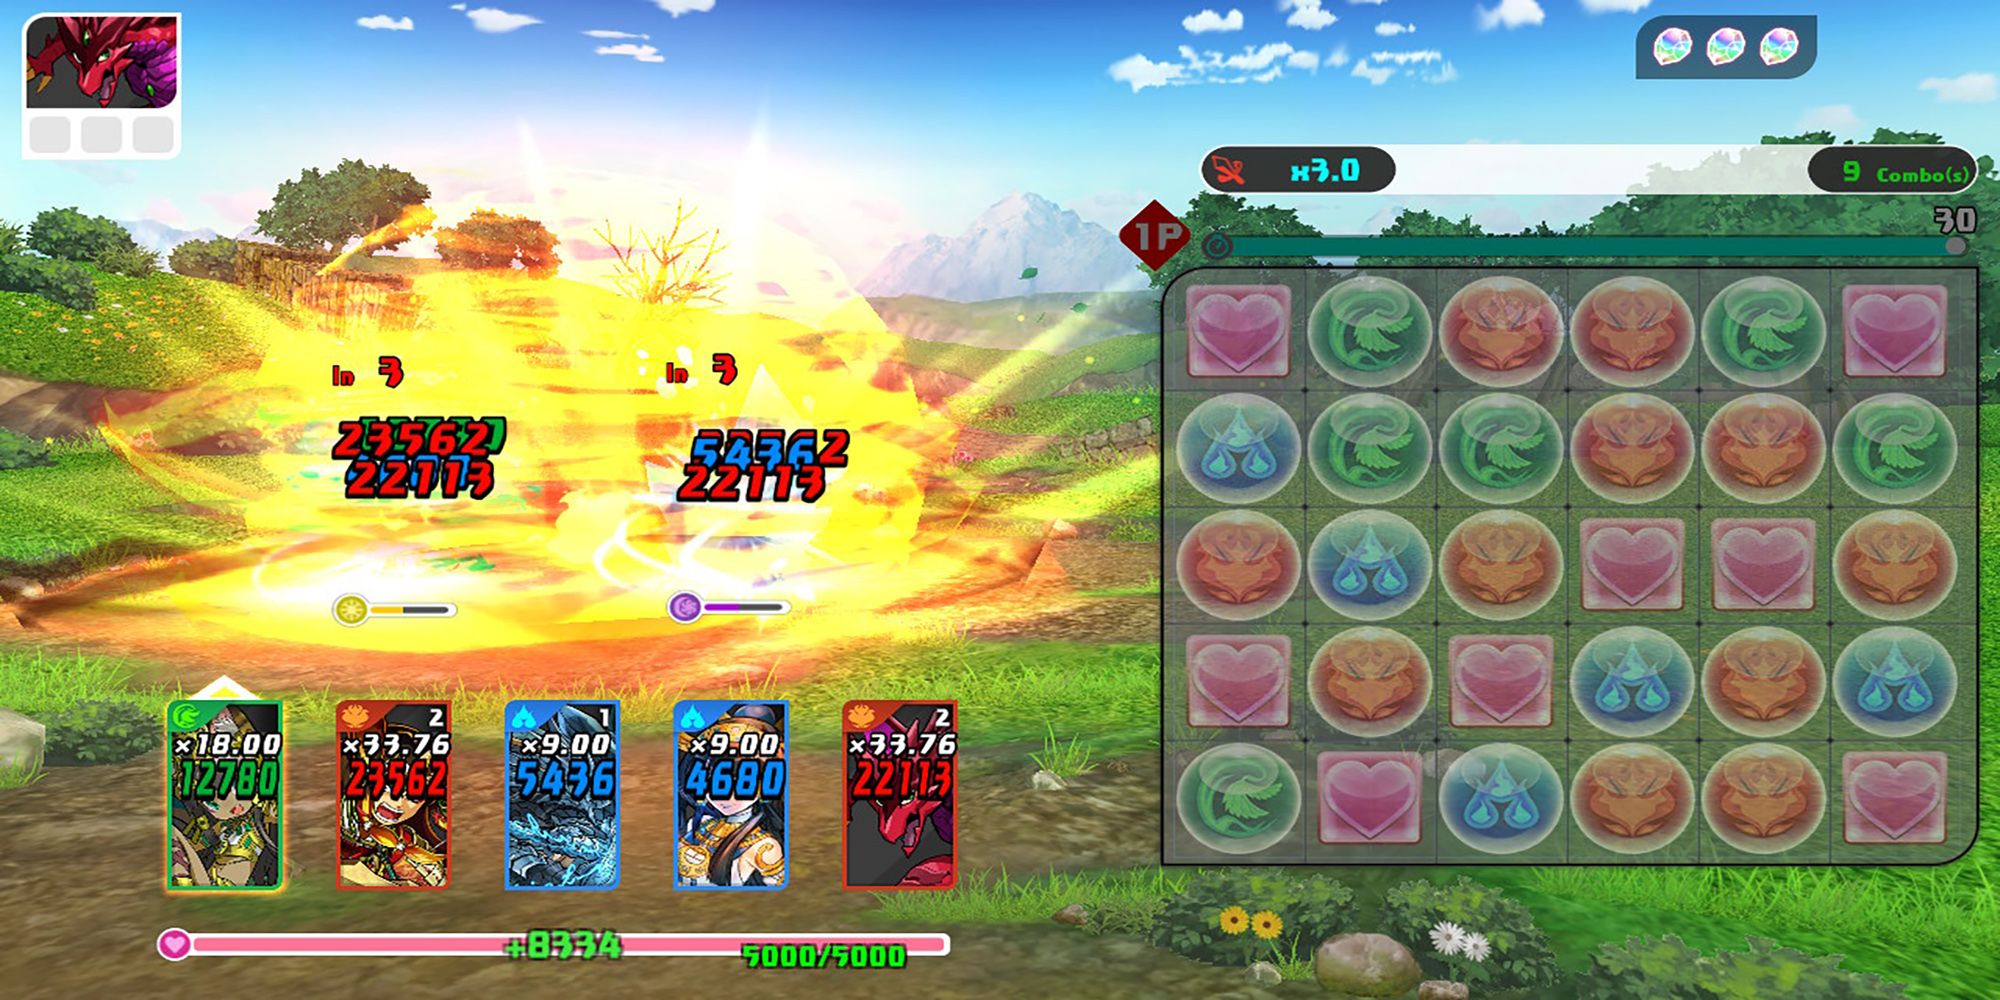 A team of warriors unleash an explosive mass attack on monsters in Puzzle And Dragons: Nintendo Switch Edition.